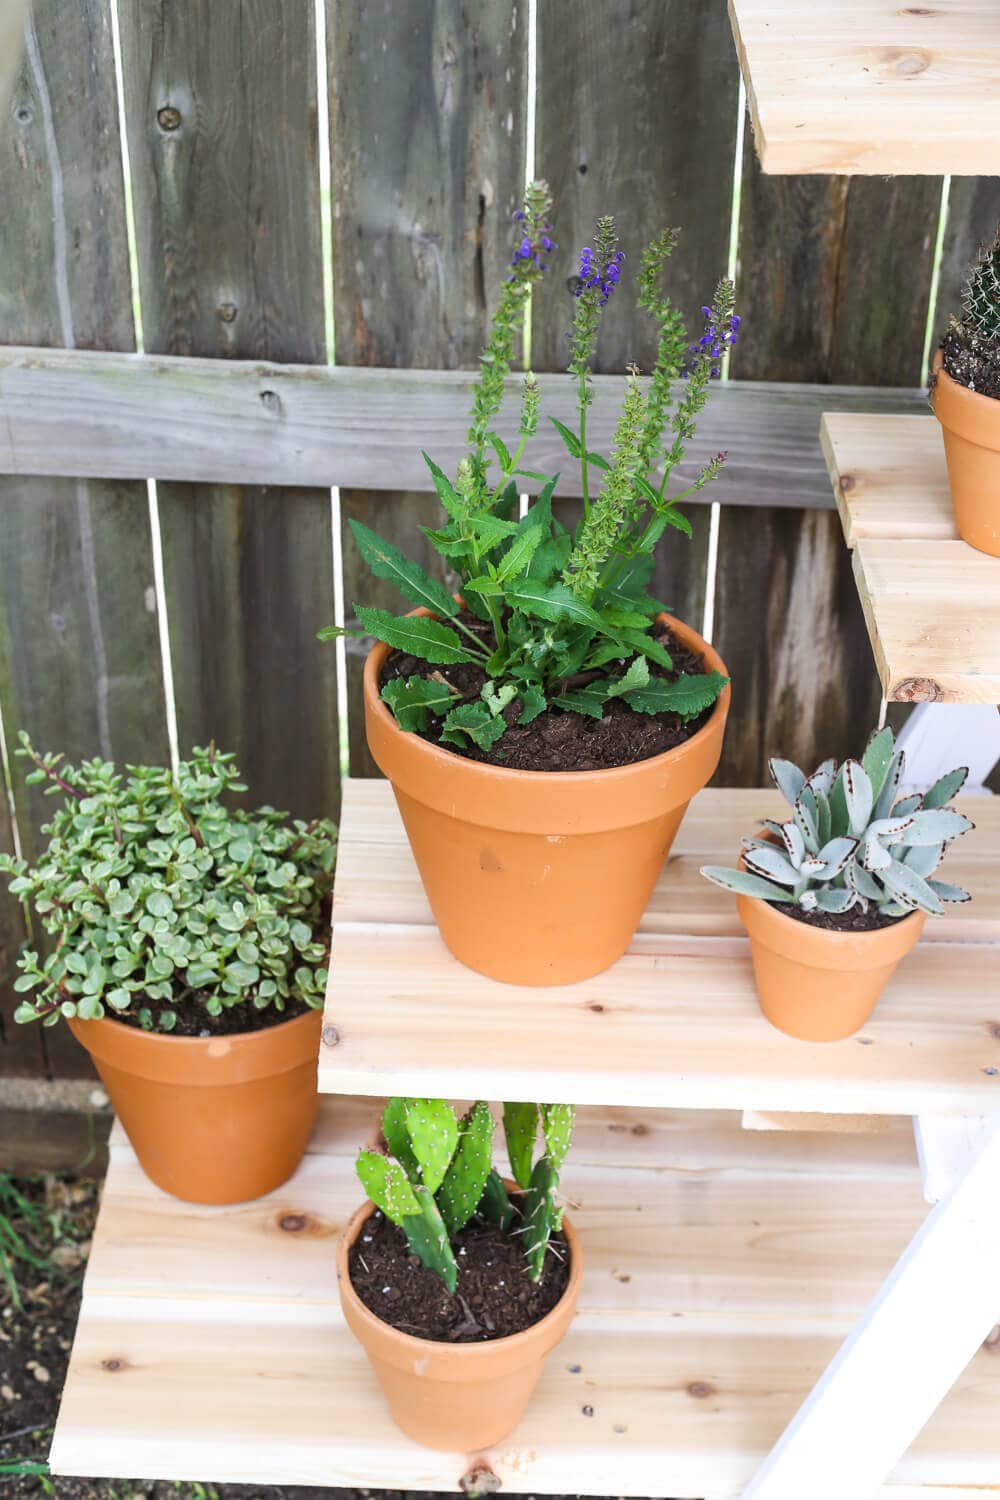 Turn a ladder into a plant stand